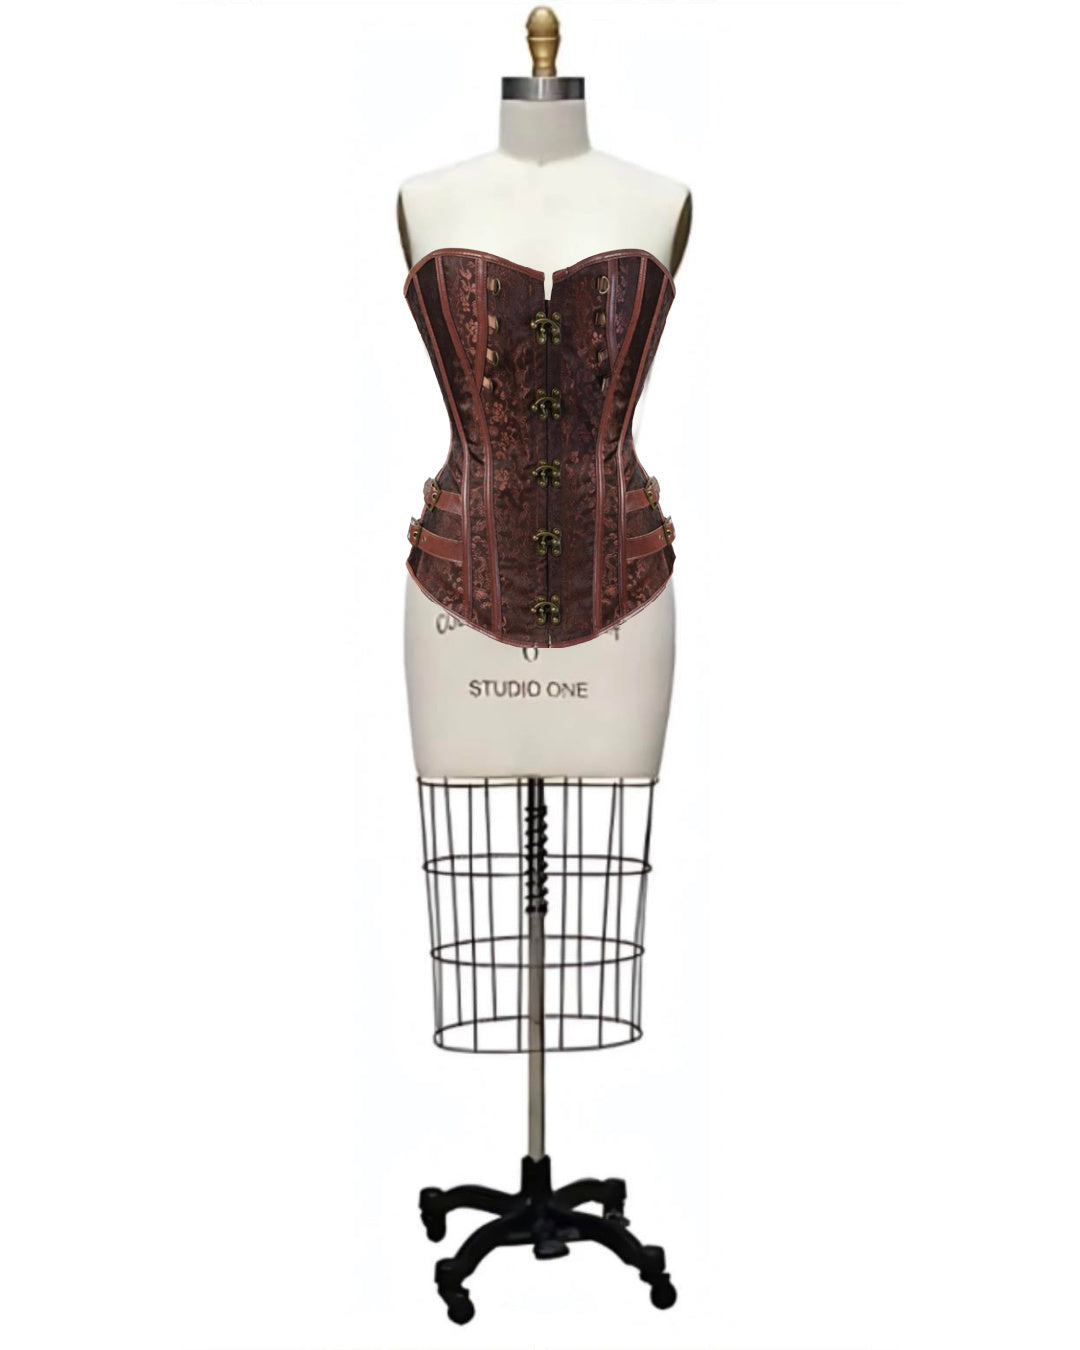 Swashbuckled- the Buckle Trimmed Faux Leather & Damask Corset Top 3 Colors Plus Sizes